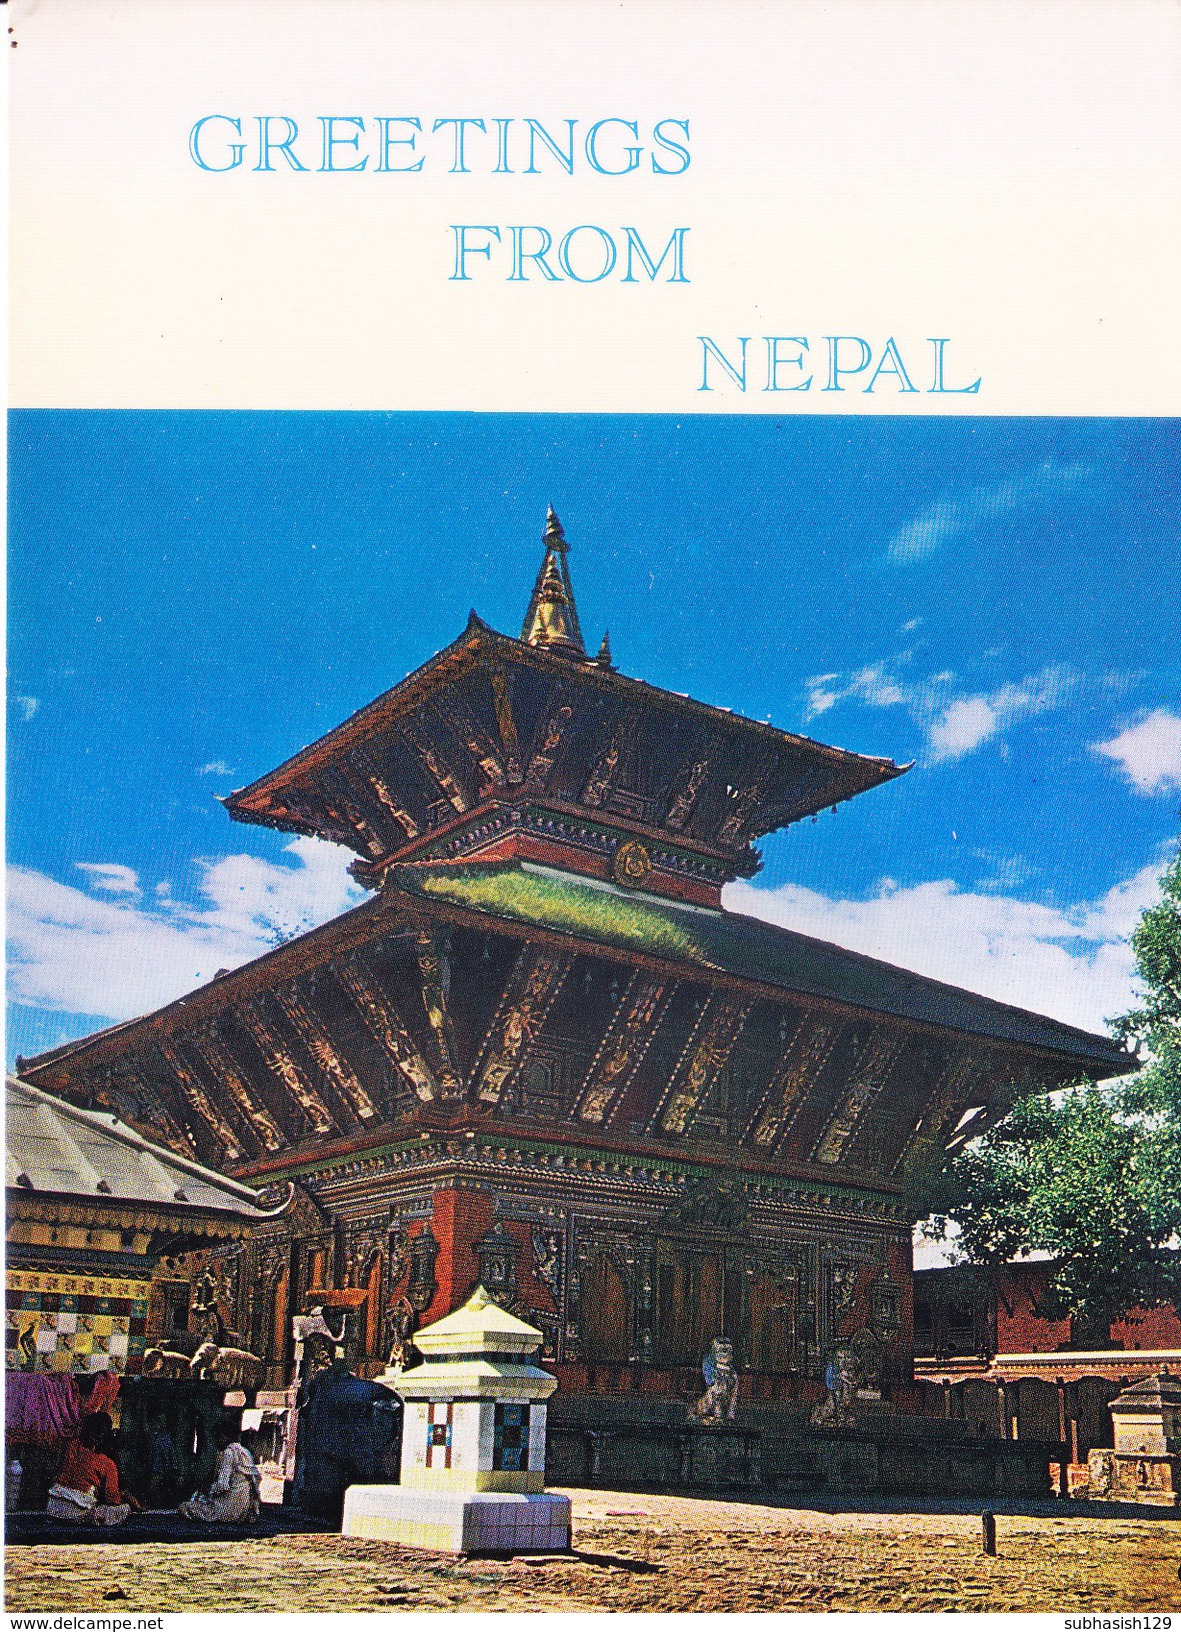 COLOUR PICTURE POST CARD PRINTED IN NEPAL - CHANGRU NARAYAN TEMPLE, NEPAL - TOURISM AND HINDUISM THEME - HINDU TEMPLE - Nepal